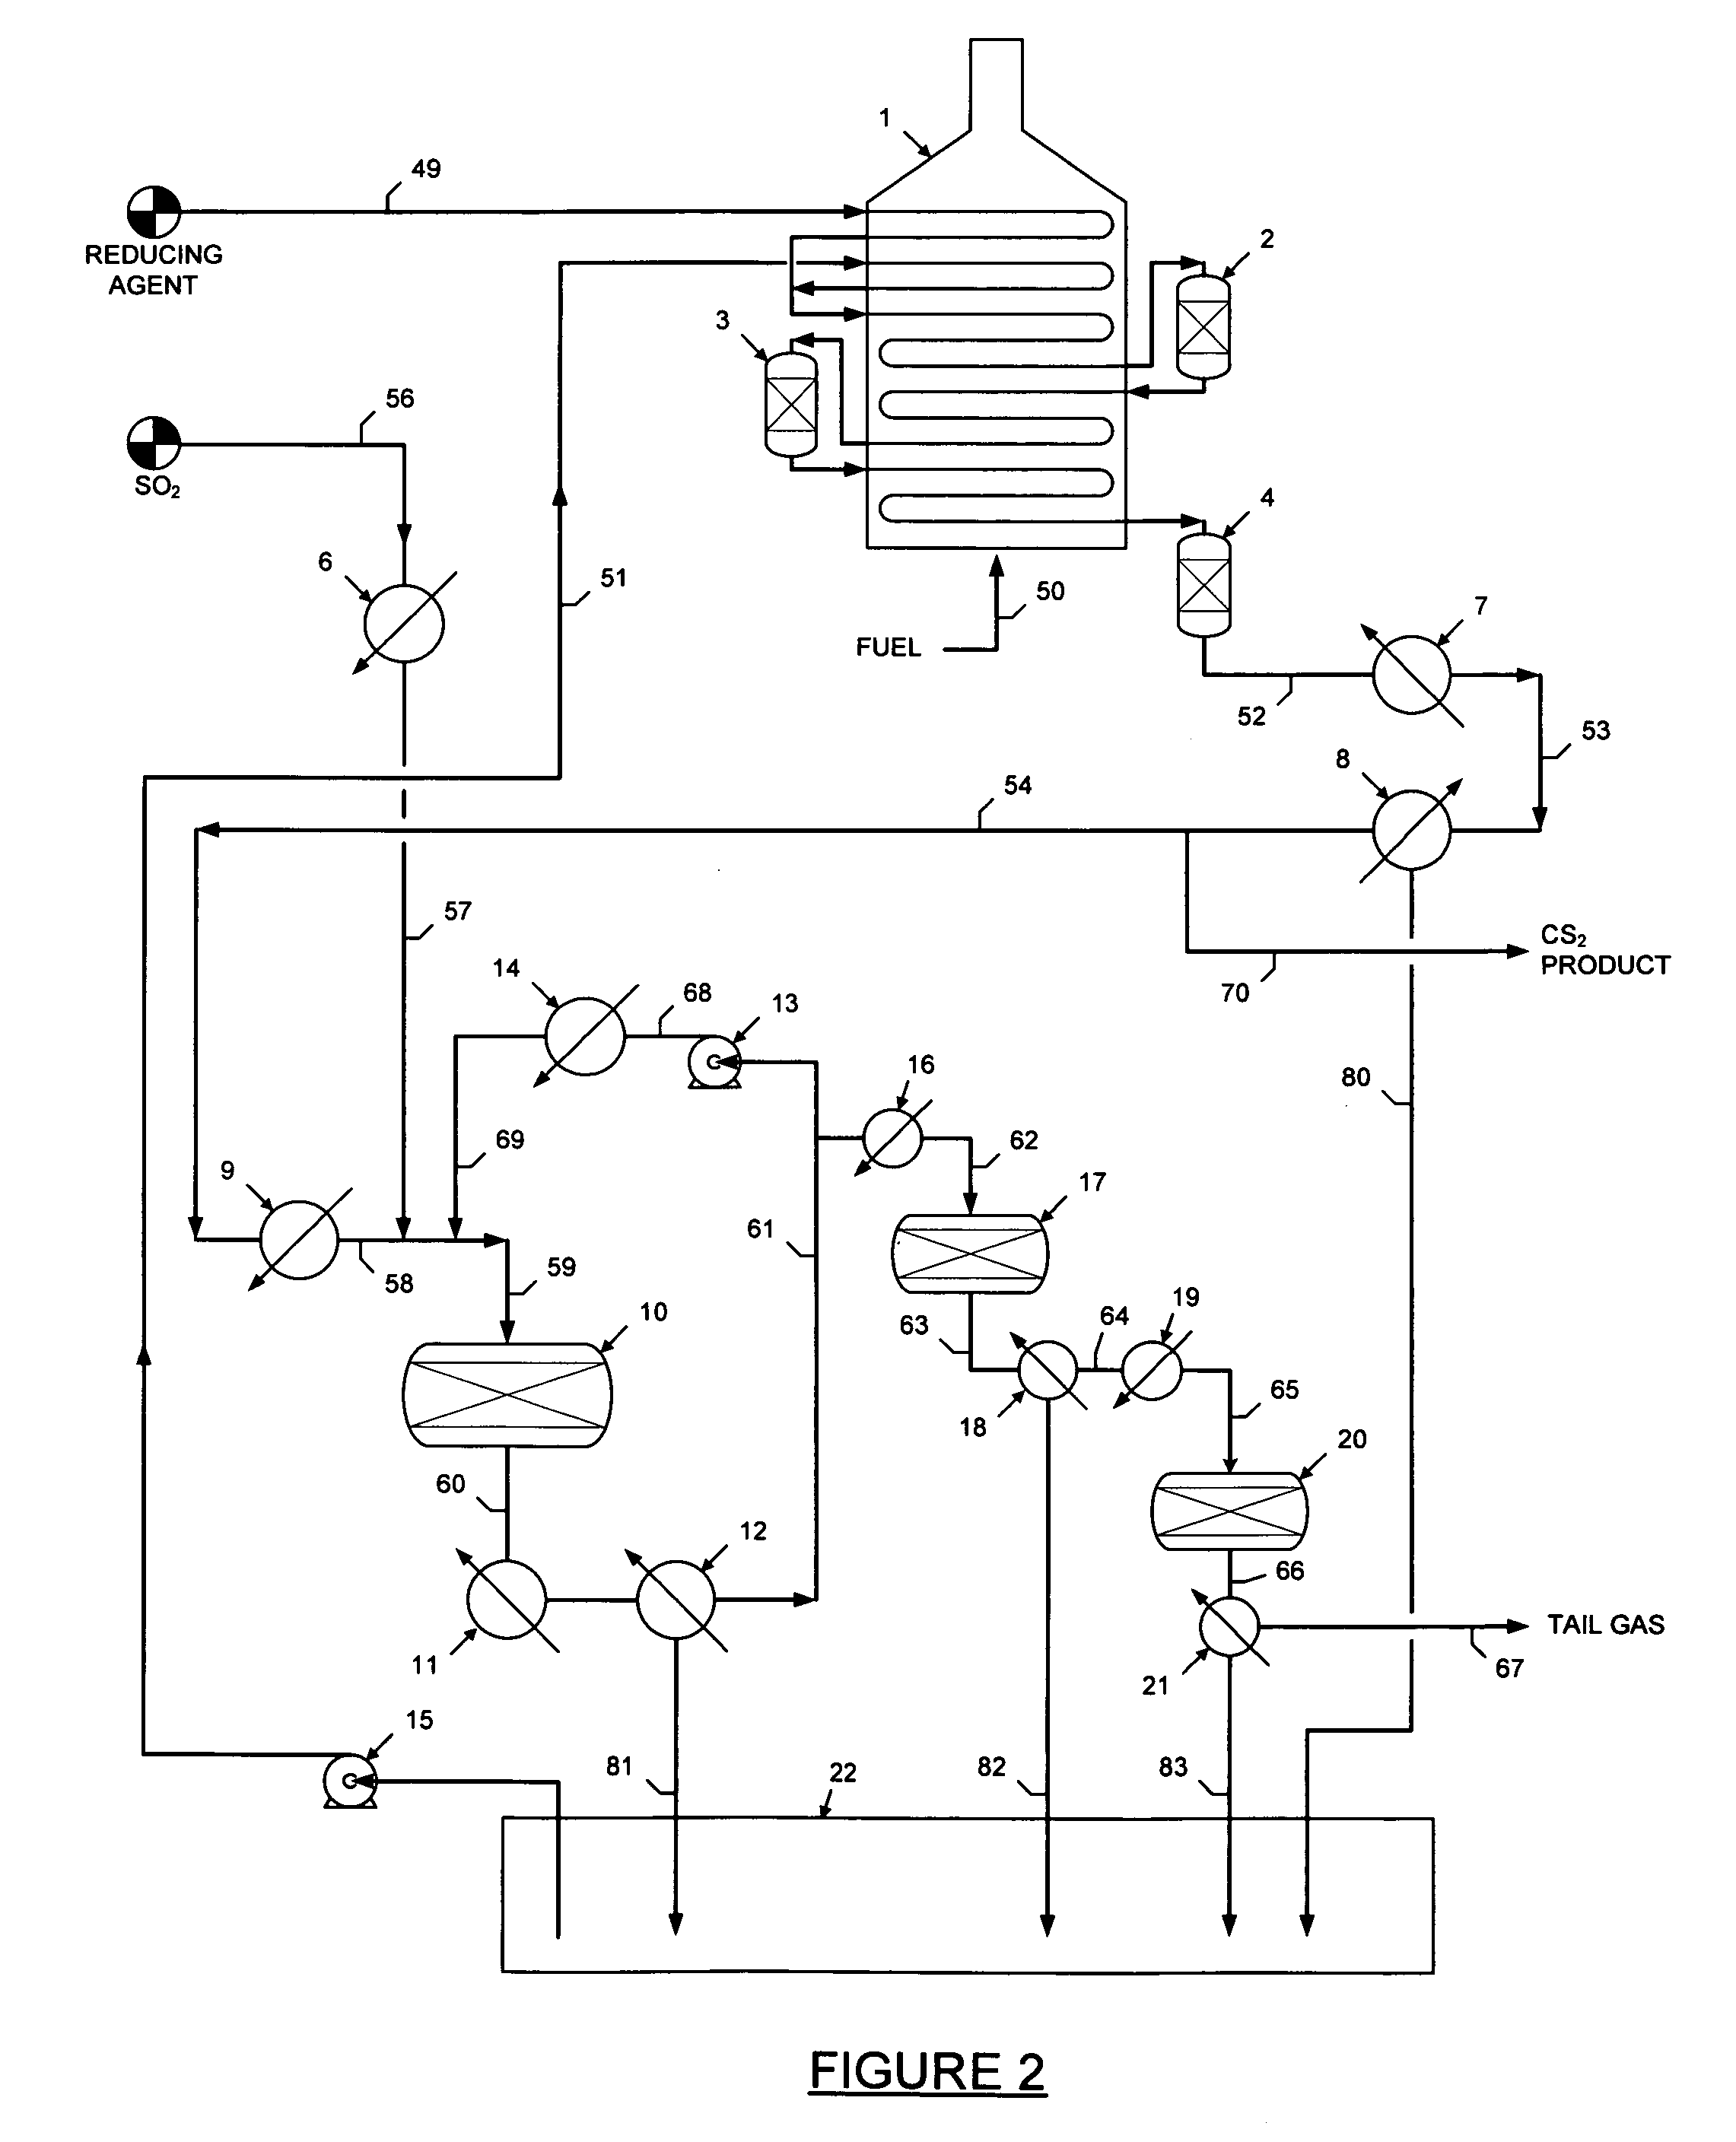 Process for the production of sulfur from sulfur dioxide